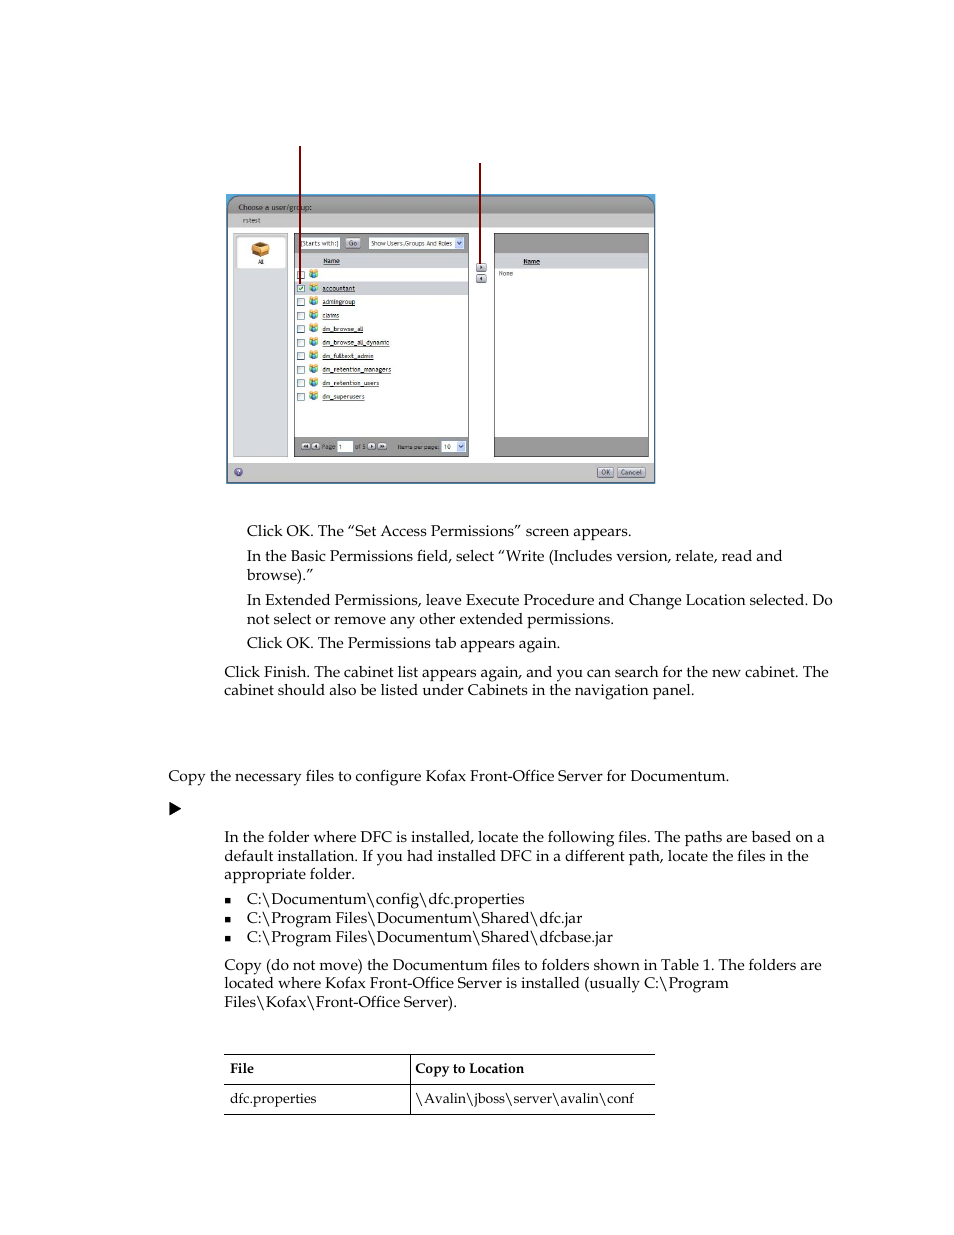 Configuring kofax front-office server | Kofax Front-Office Server 2.7 User Manual | Page 8 / 10